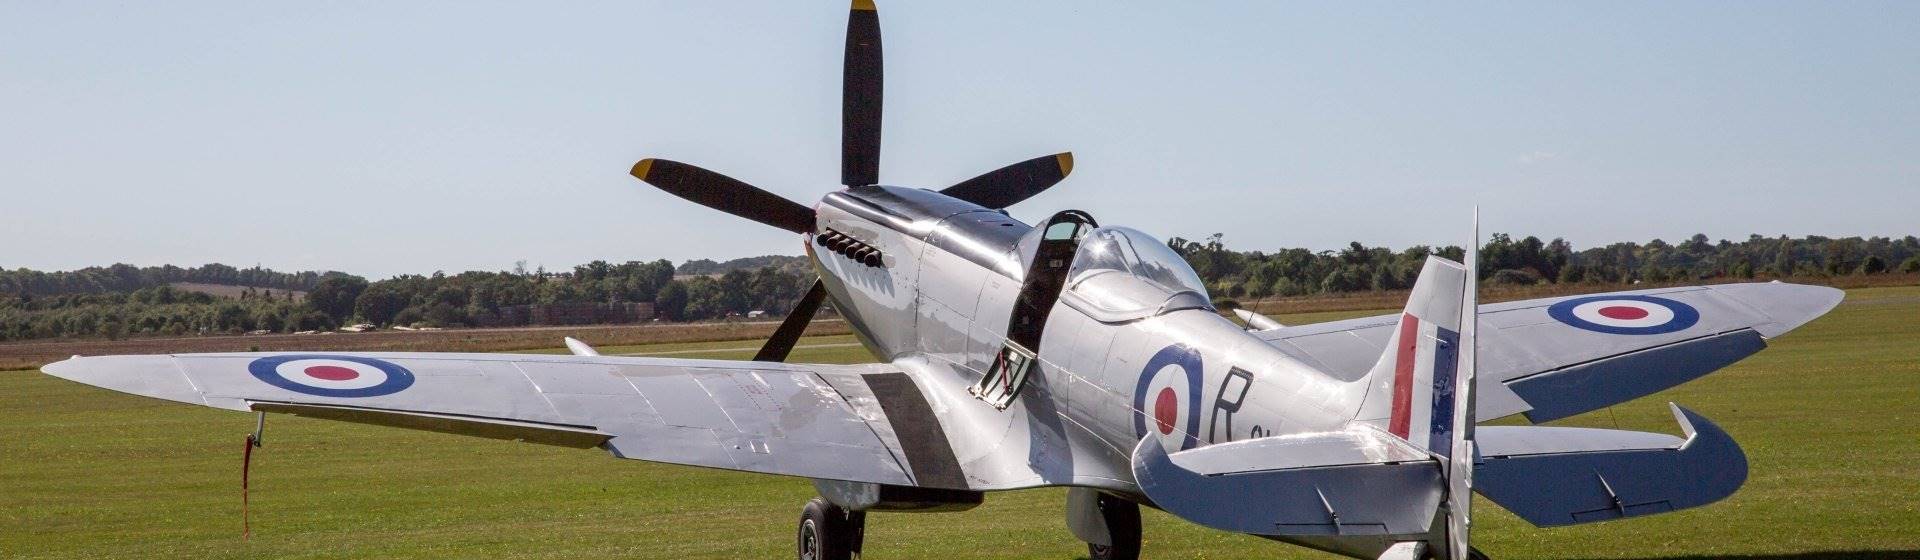 A Spitfire sitting waiting to perform at the Duxford air show